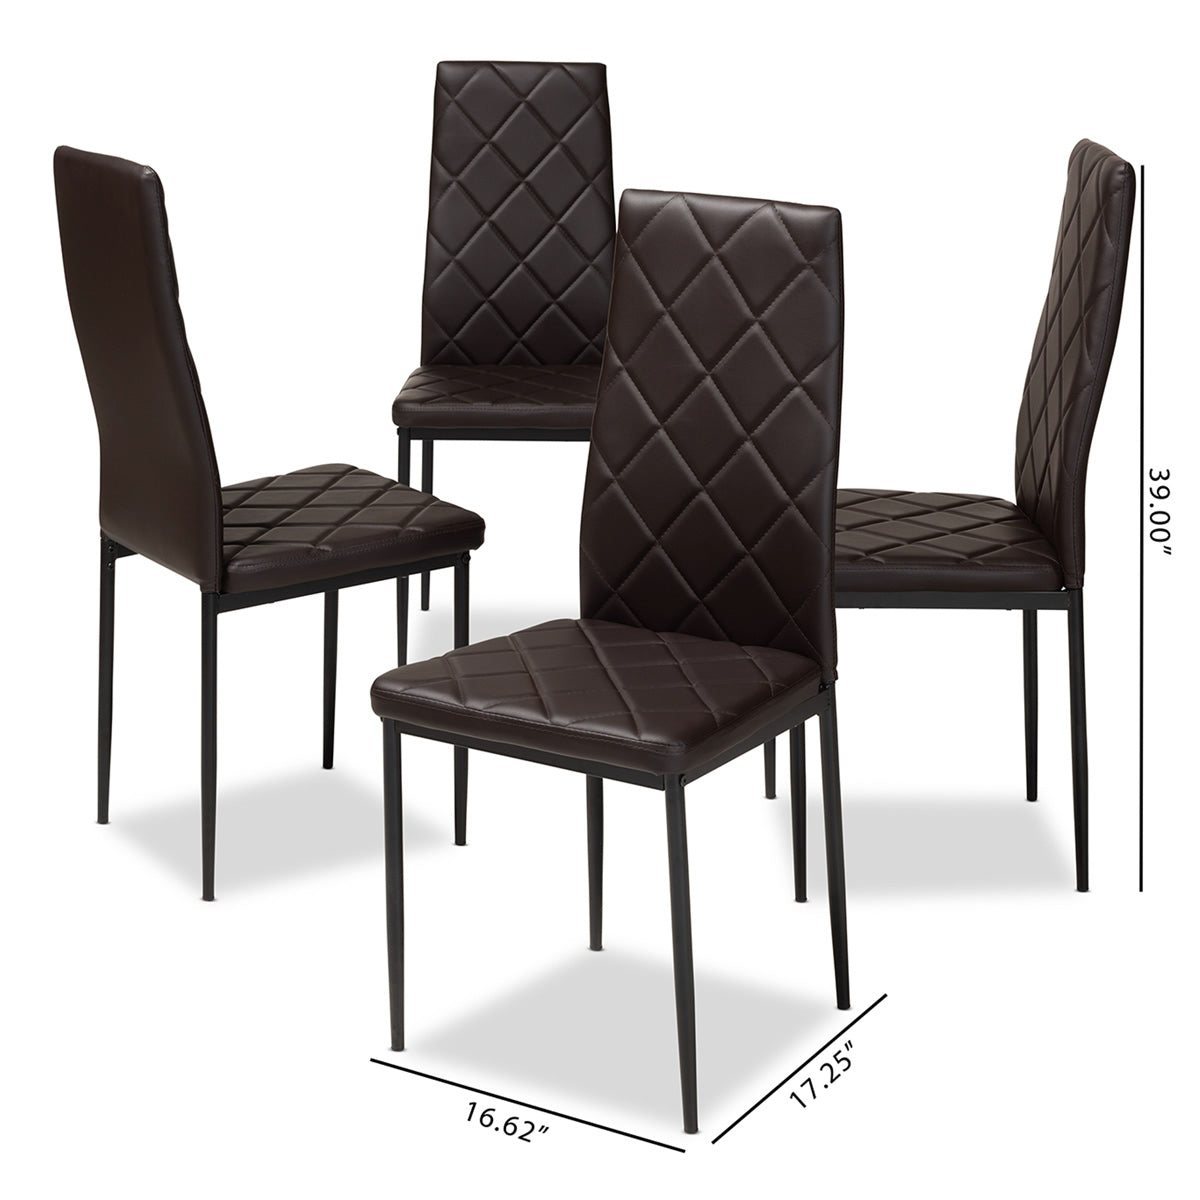 Baxton Studio Blaise Modern and Contemporary Brown Faux Leather Upholstered Dining Chair (Set of 4) Baxton Studio-dining chair-Minimal And Modern - 5